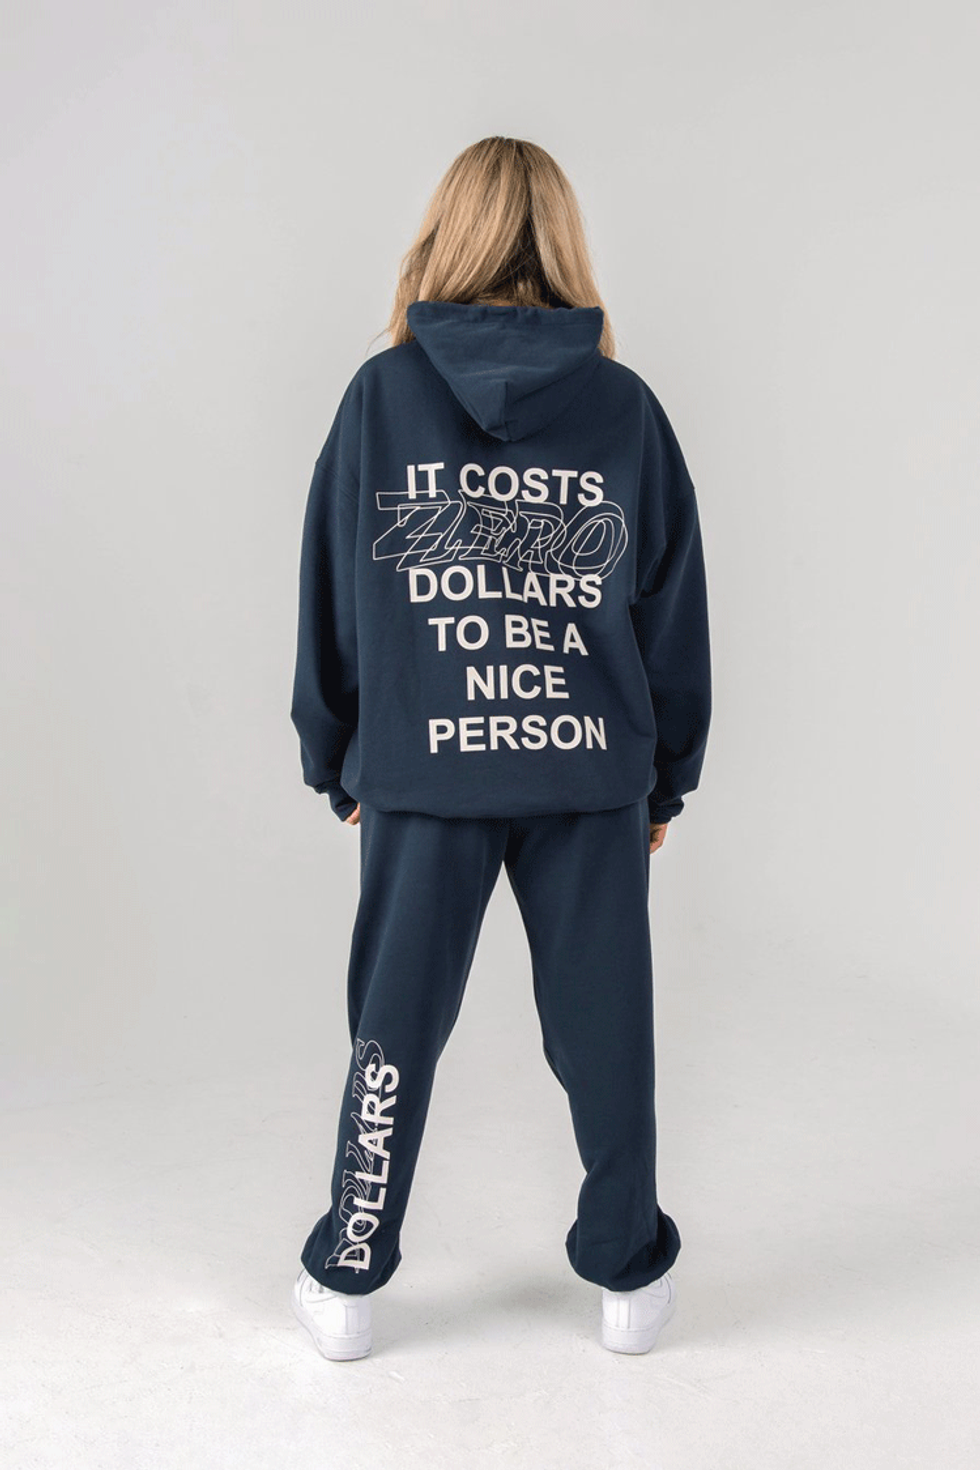 It Costs $0 To Be A Nice Person Navy Hoodie